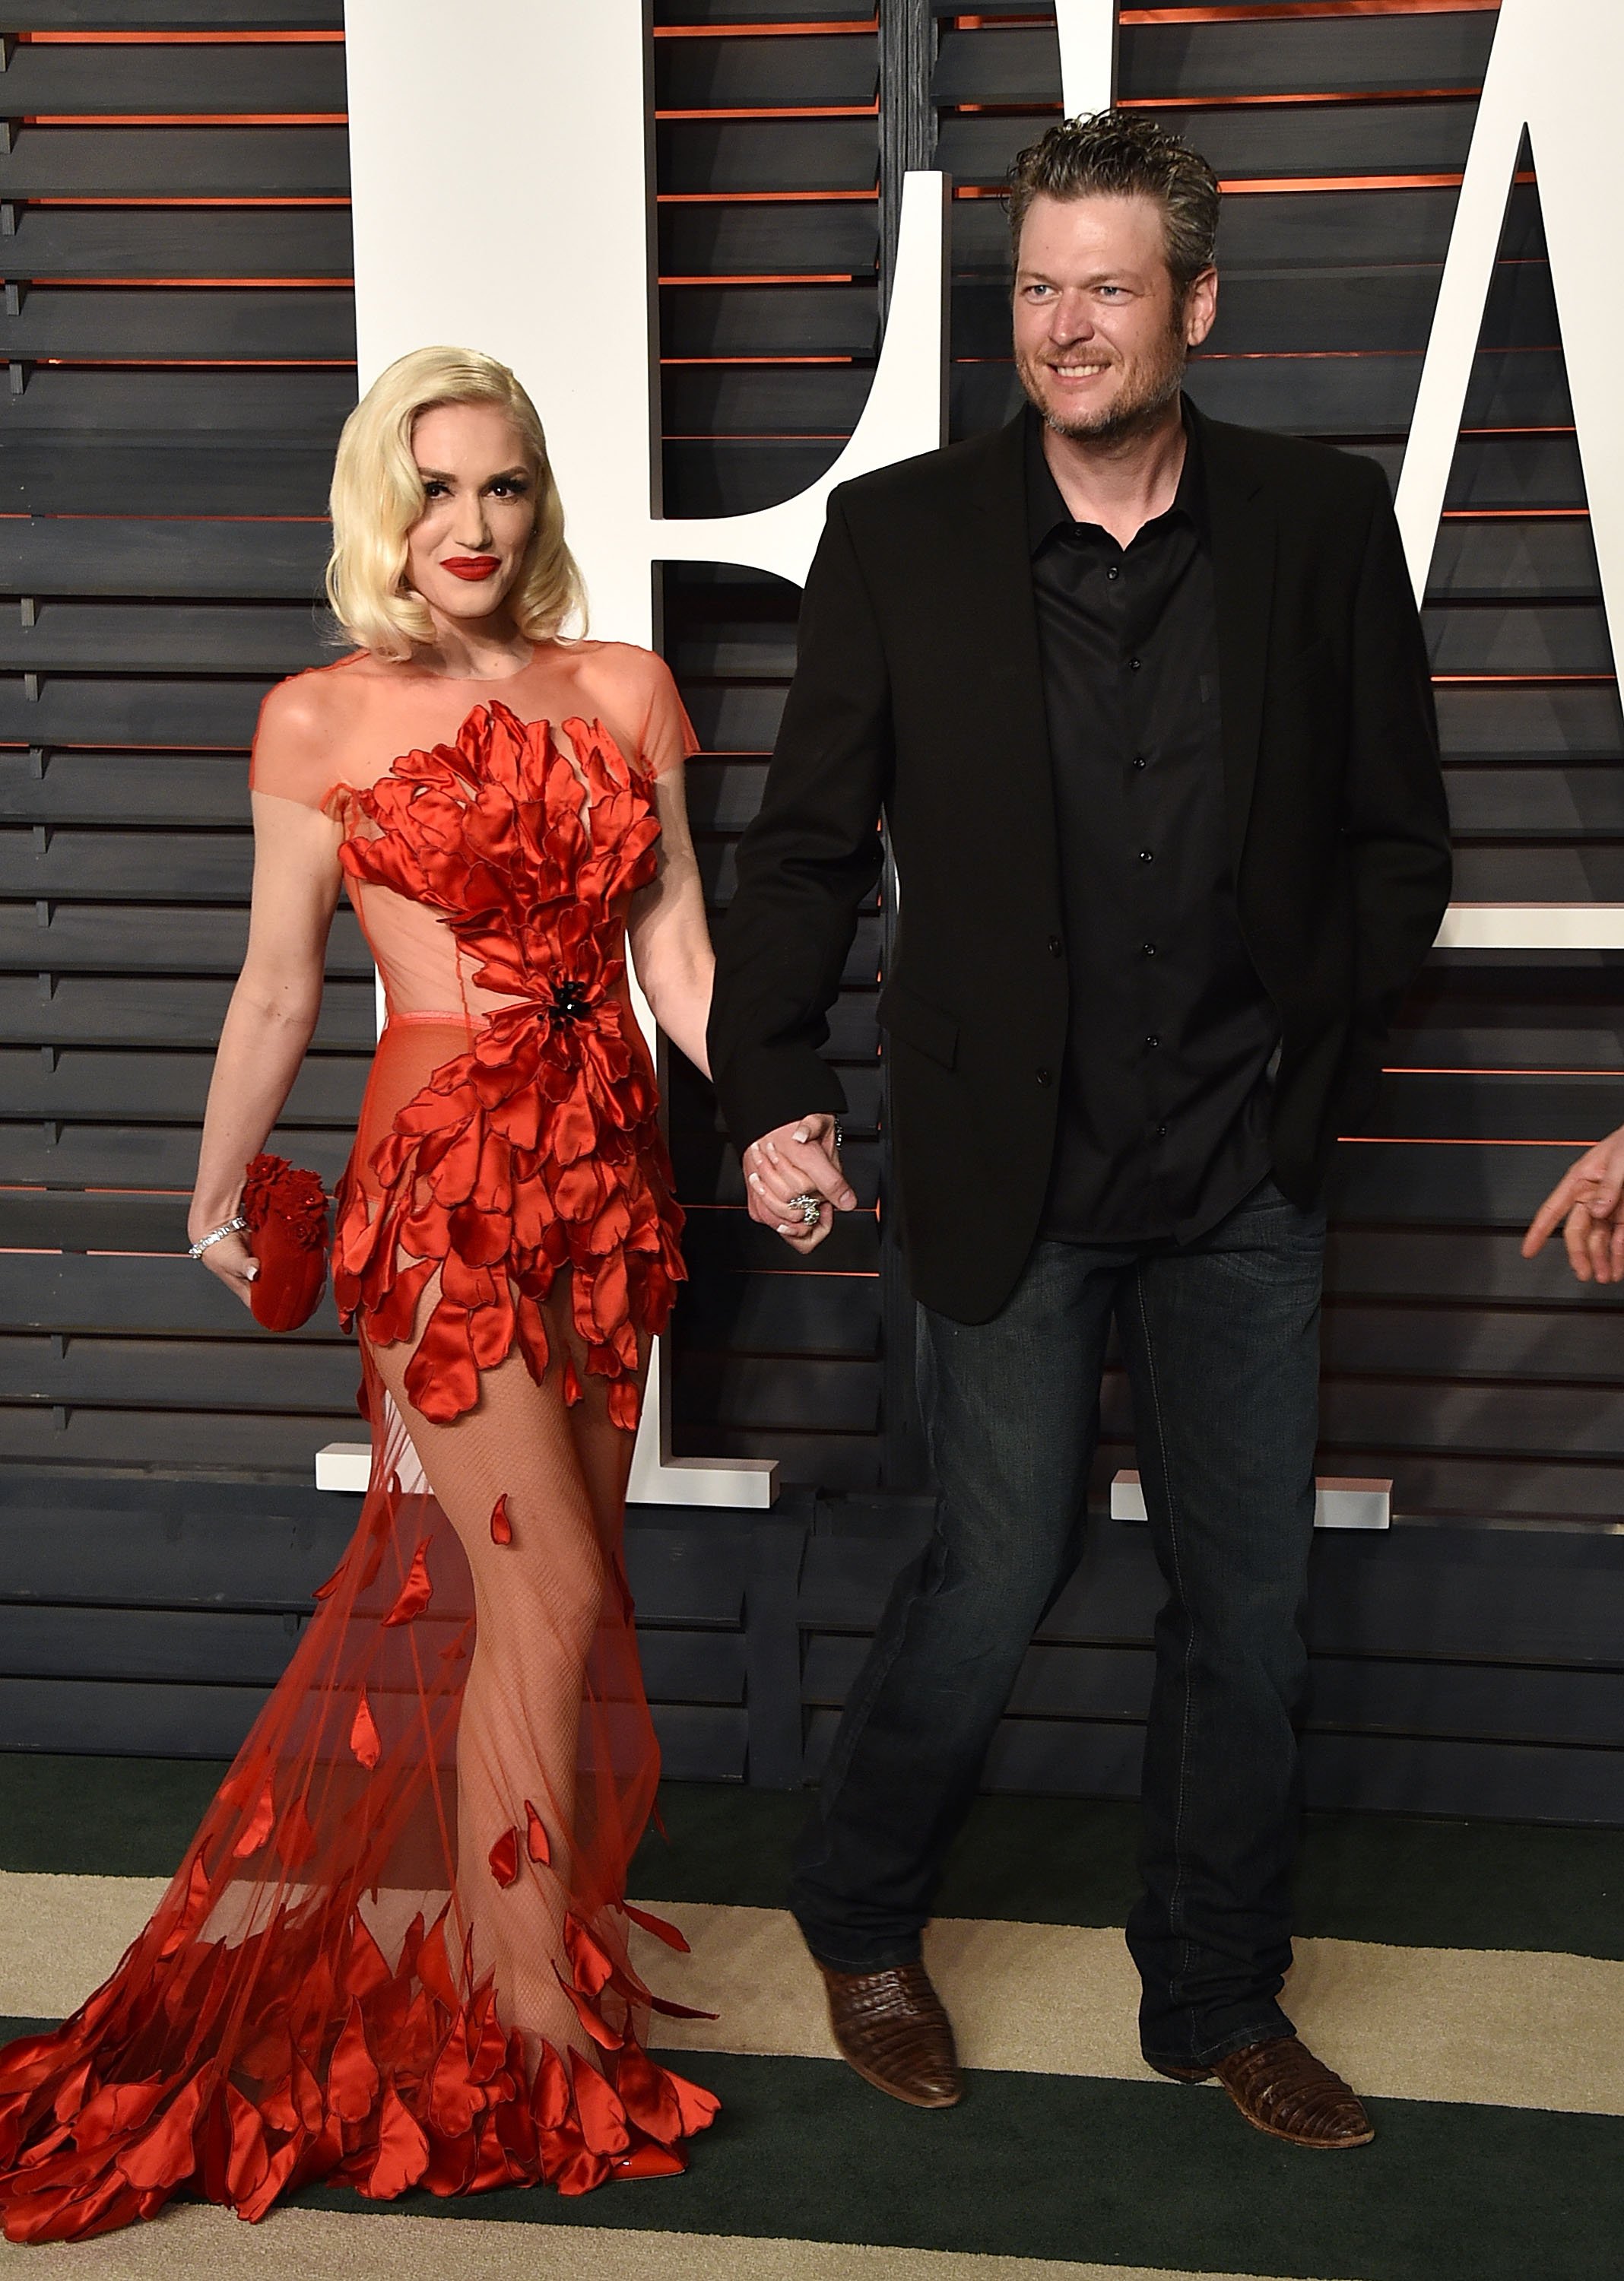 Gwen Stefani and Blake Shelton at the 2016 Vanity Fair Oscar Party on February 28, 2016 in Beverly Hills, California | Source: Getty Images